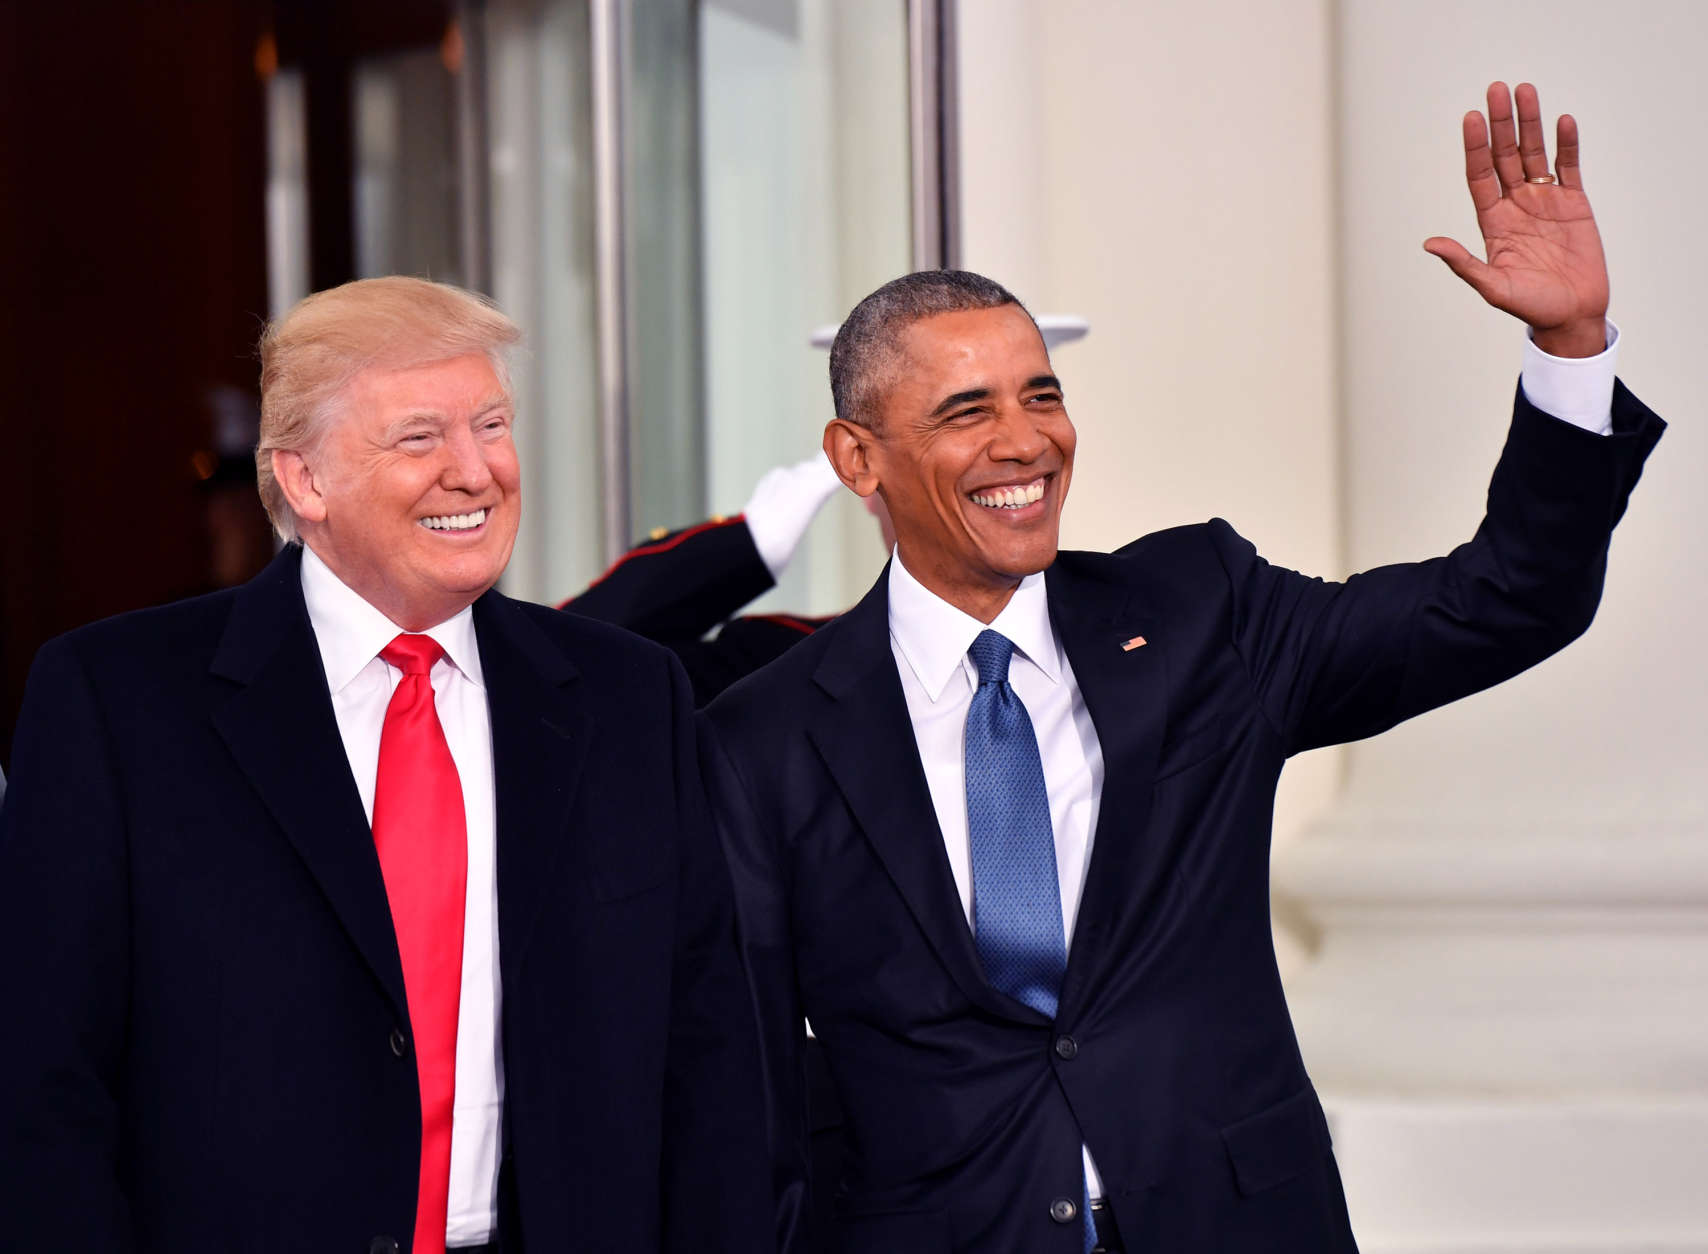 President-elect Donald Trump and President Barak Obama smile at the White House before the inauguration on Jan. 20, 2017, in Washington, D.C.   (Photo by Kevin Dietsch-Pool/Getty Images)